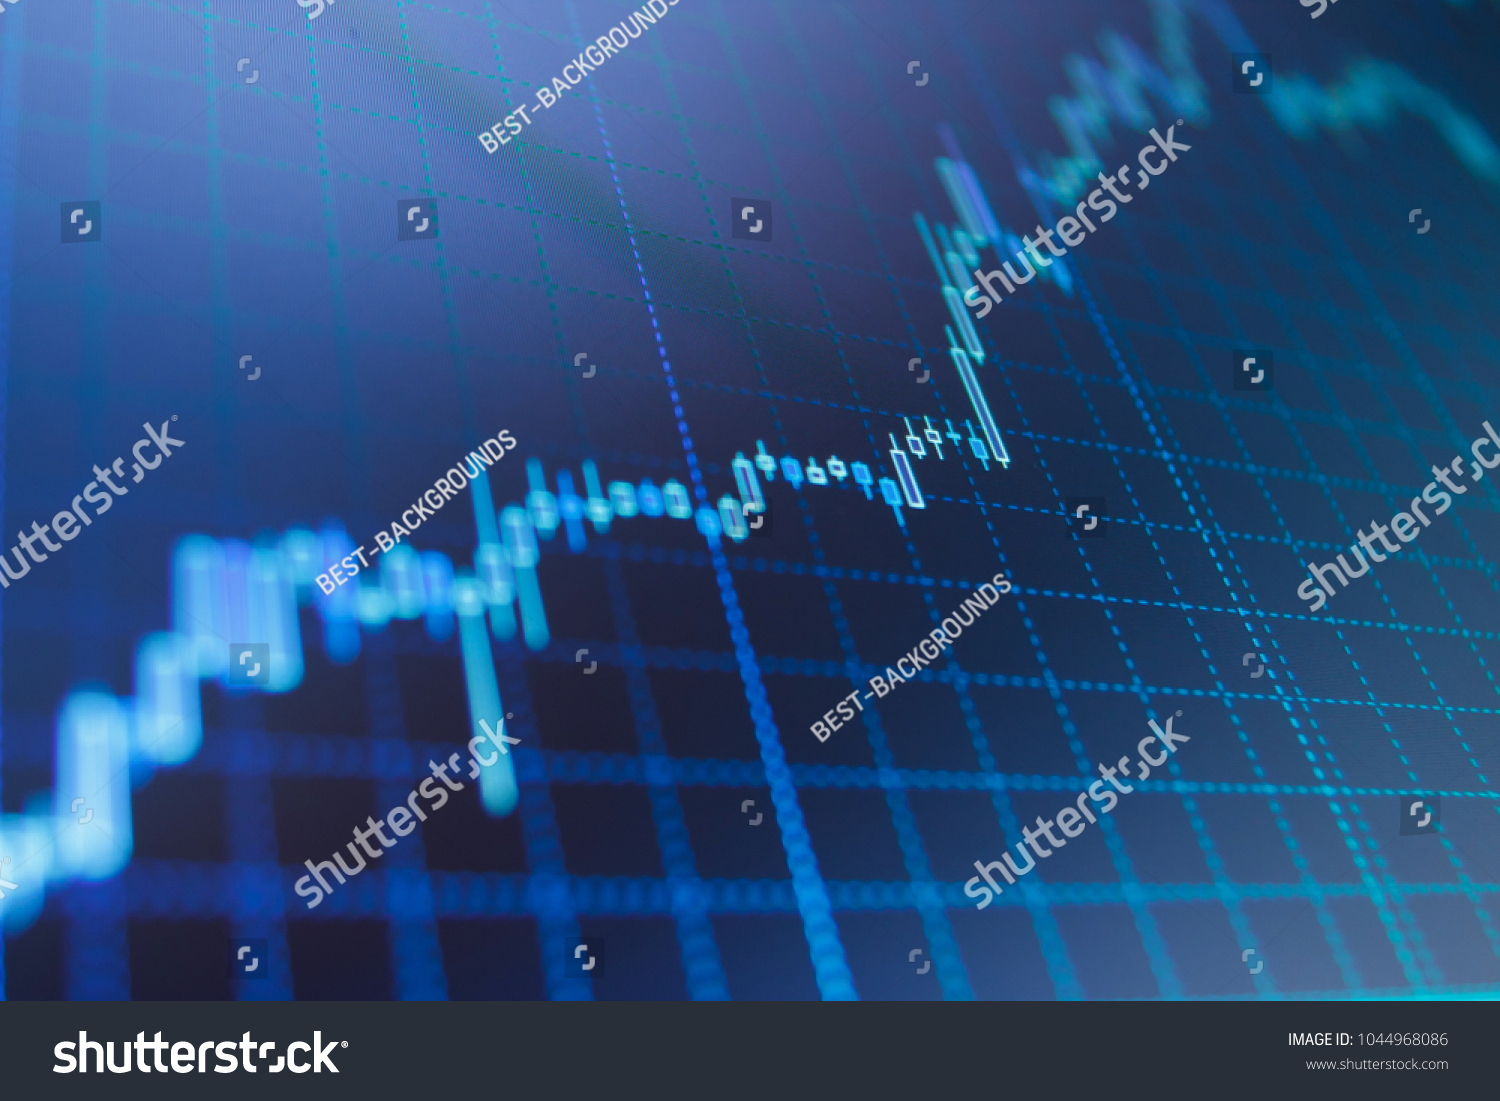 Stock market chart on LCD screen. Stock market and other finance themes. Big data on LED panel. Currency trading theme. Stock market concept and background. Professional market analysis.  #1044968086